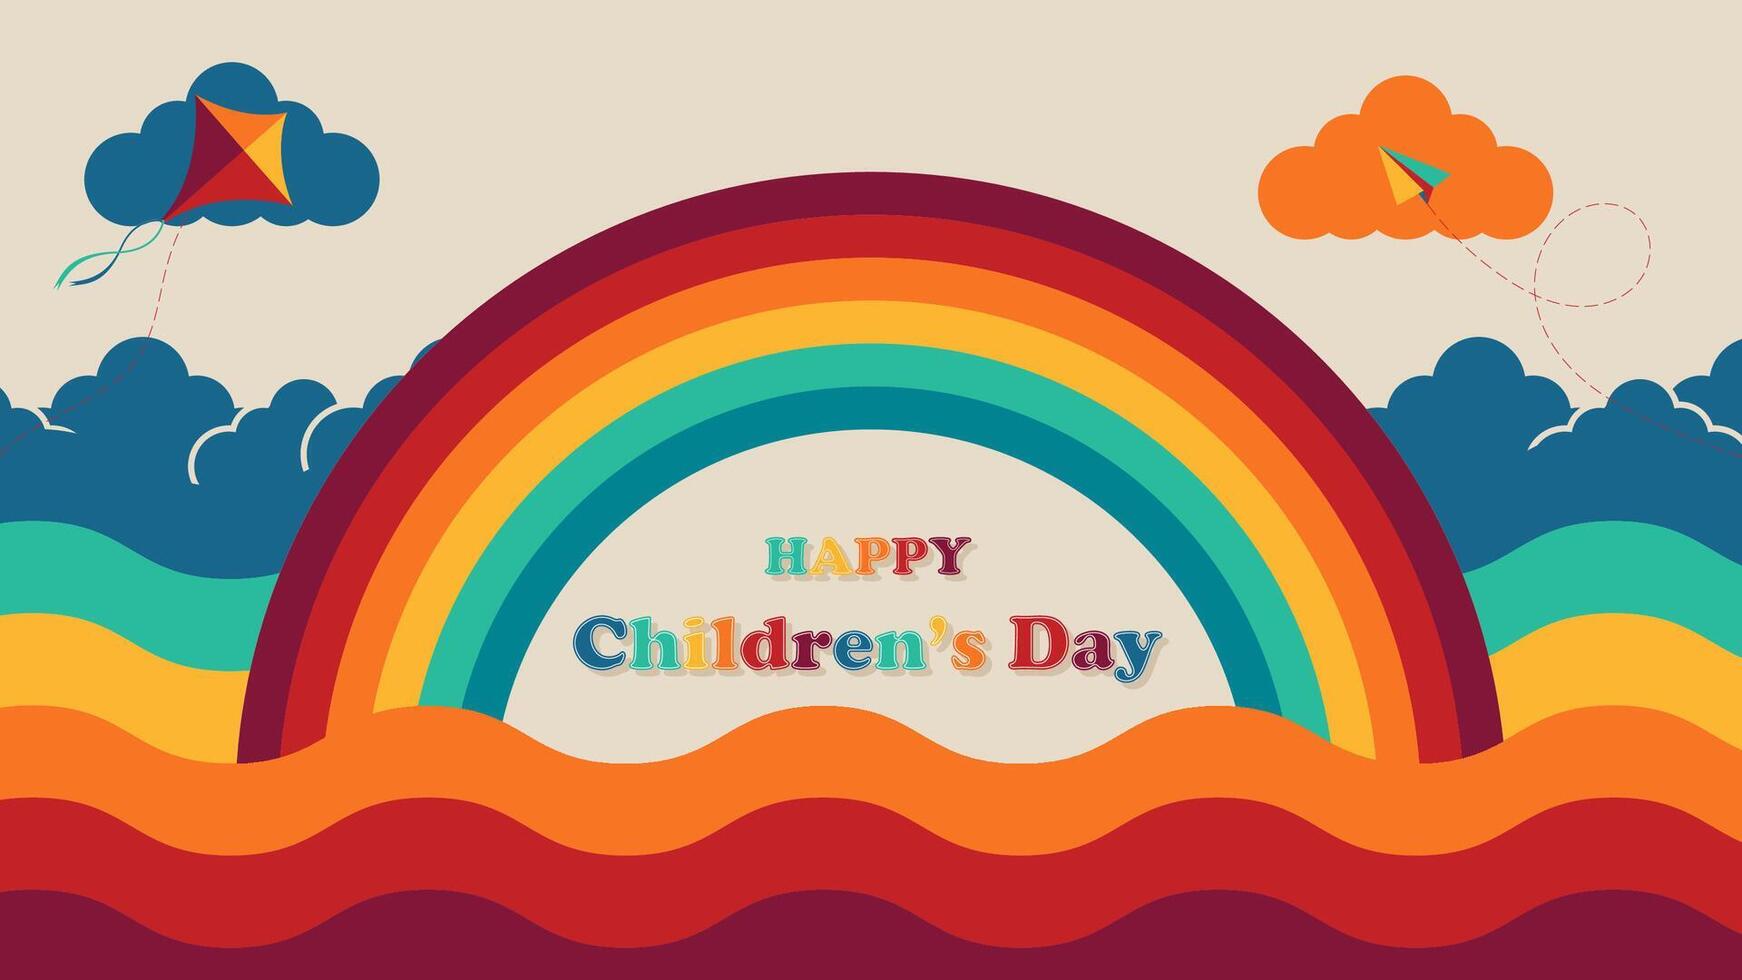 Happy Children's day background with rainbow shaped frame, illustration vector